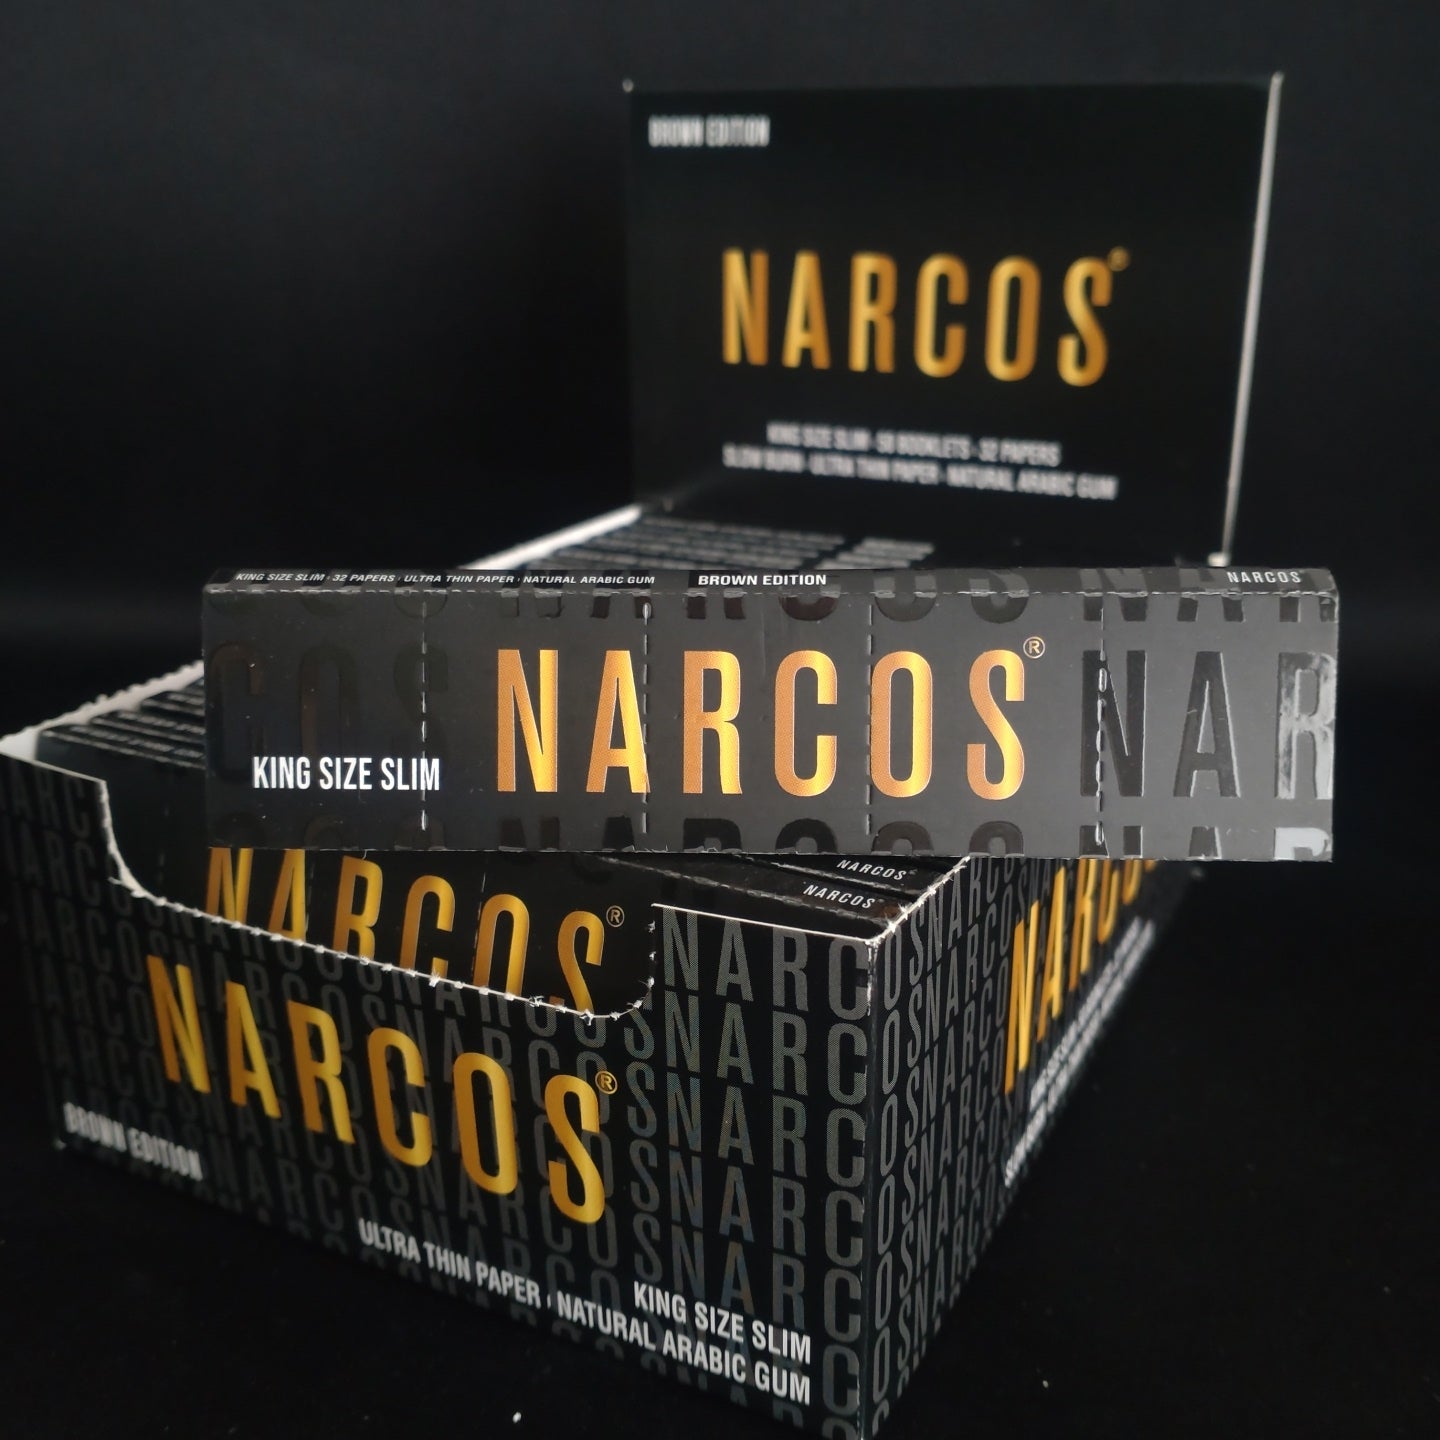 Narcos Brown Edition Papes